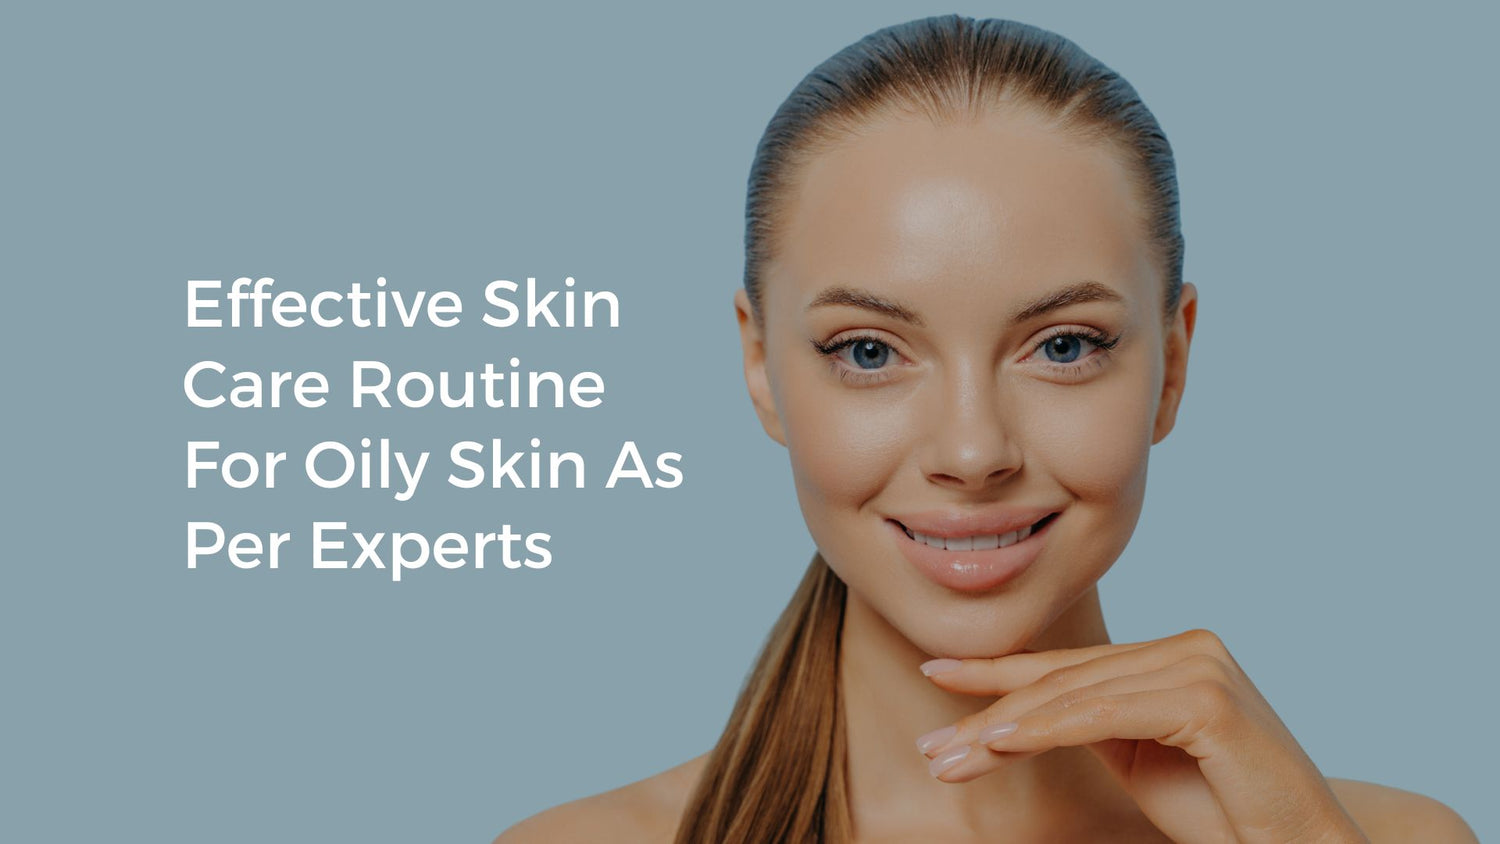 Effective Skin Care Routine For Oily Skin As Per Experts